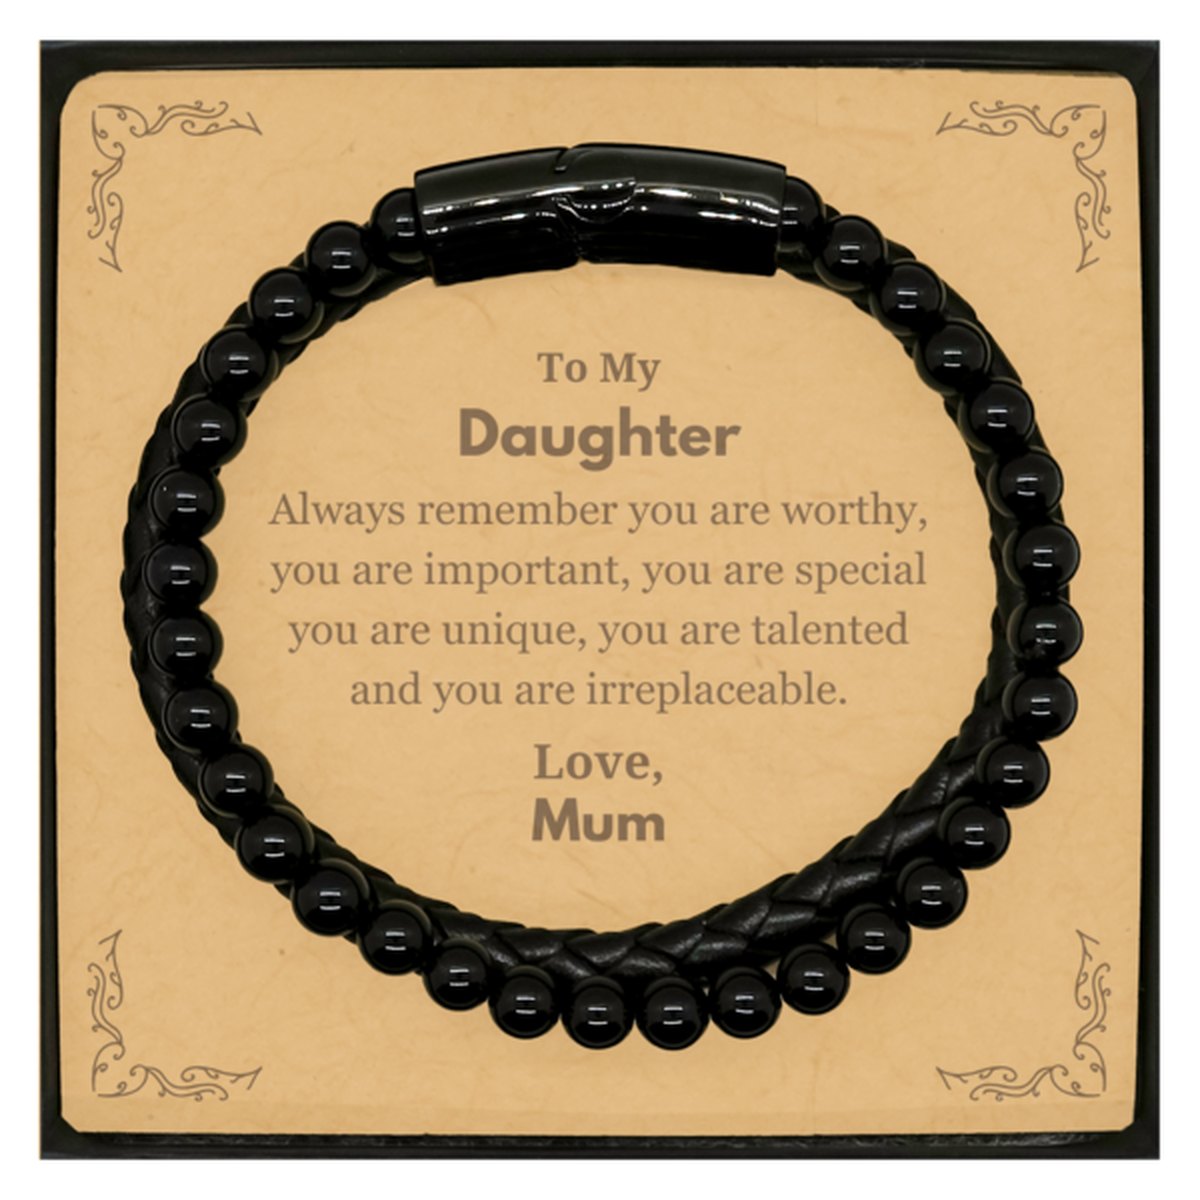 Daughter Birthday Gifts from Mum, Inspirational Stone Leather Bracelets for Daughter Christmas Graduation Gifts for Daughter Always remember you are worthy, you are important. Love, Mum